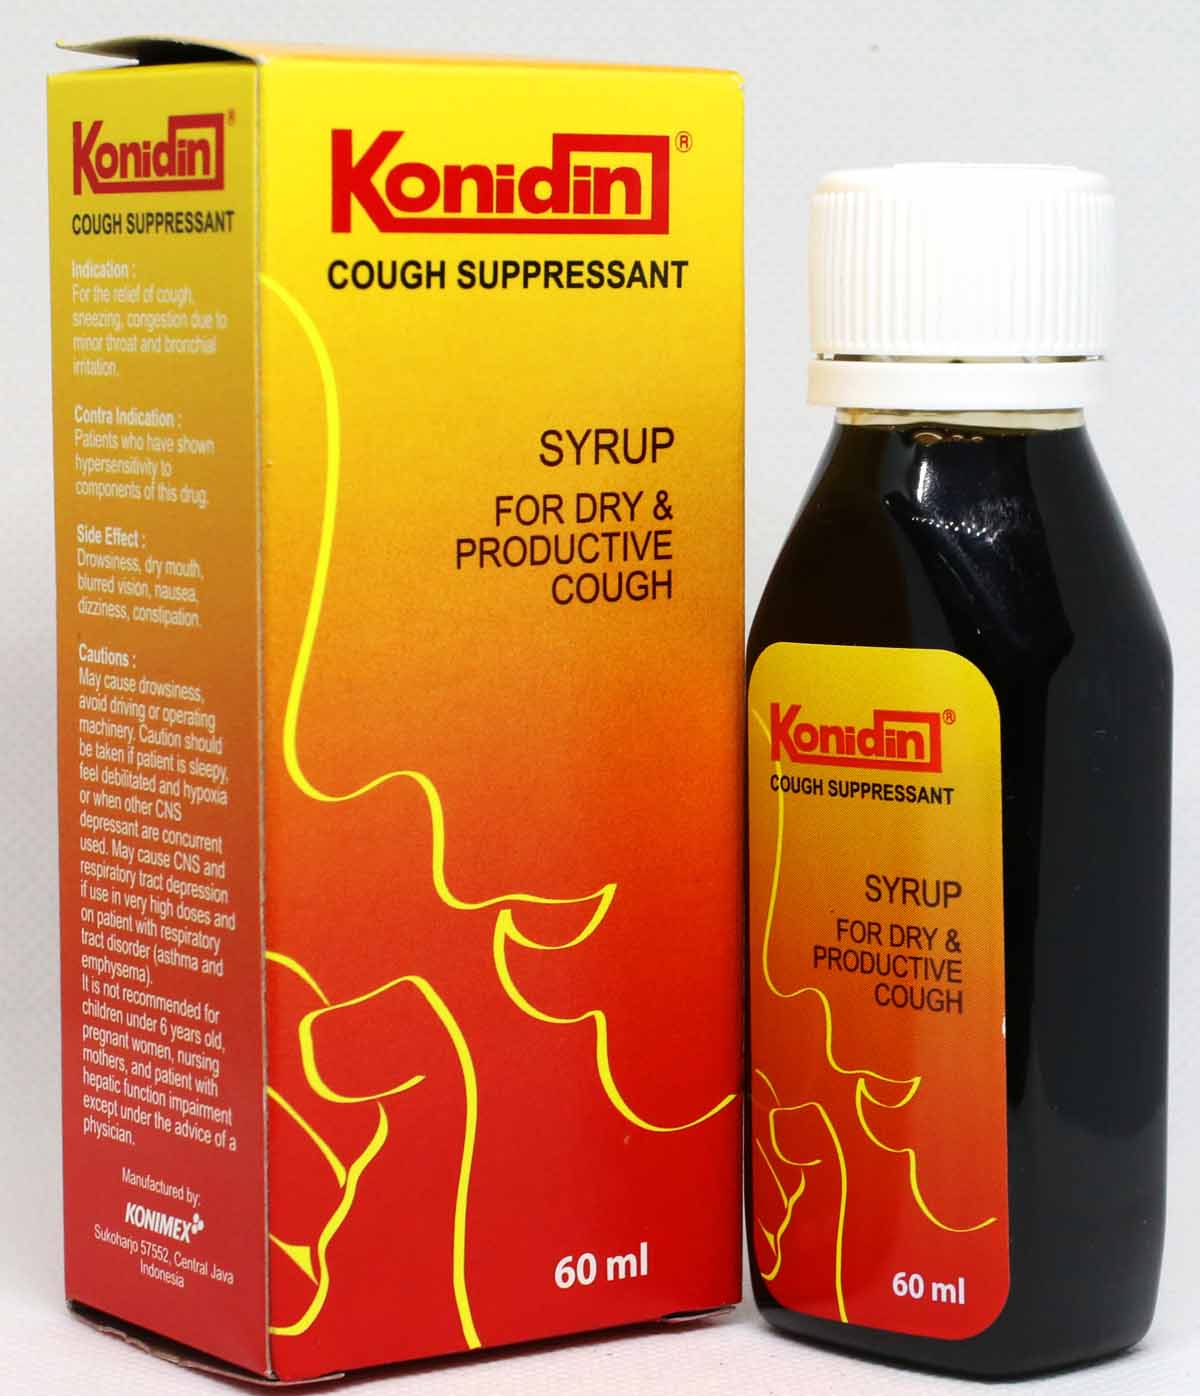 Konidin Syrup 60ml for Dry & Productive